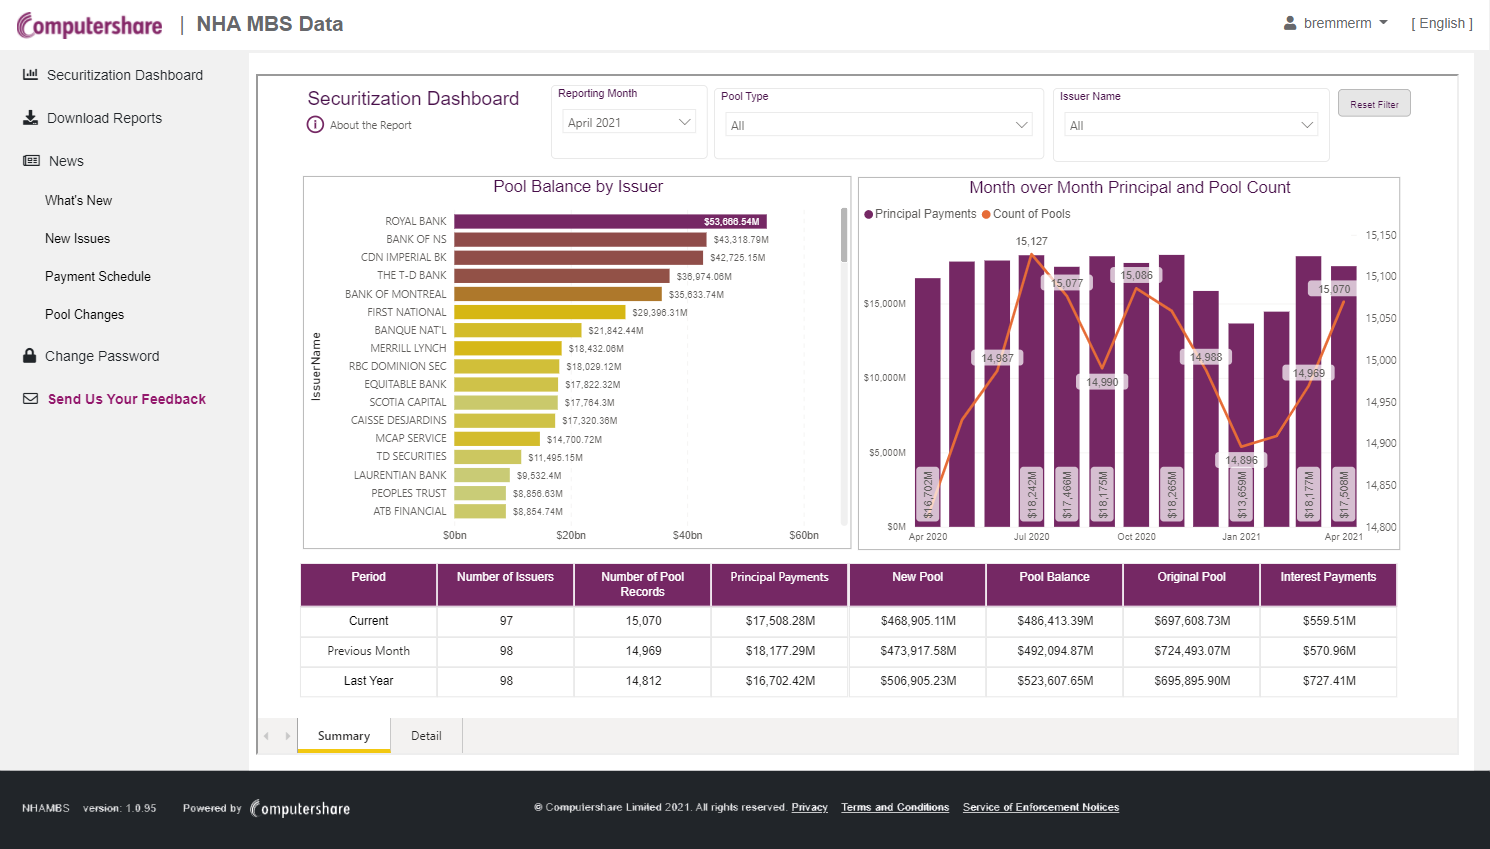 NHA MBS Data Site and Securitization Dashboard